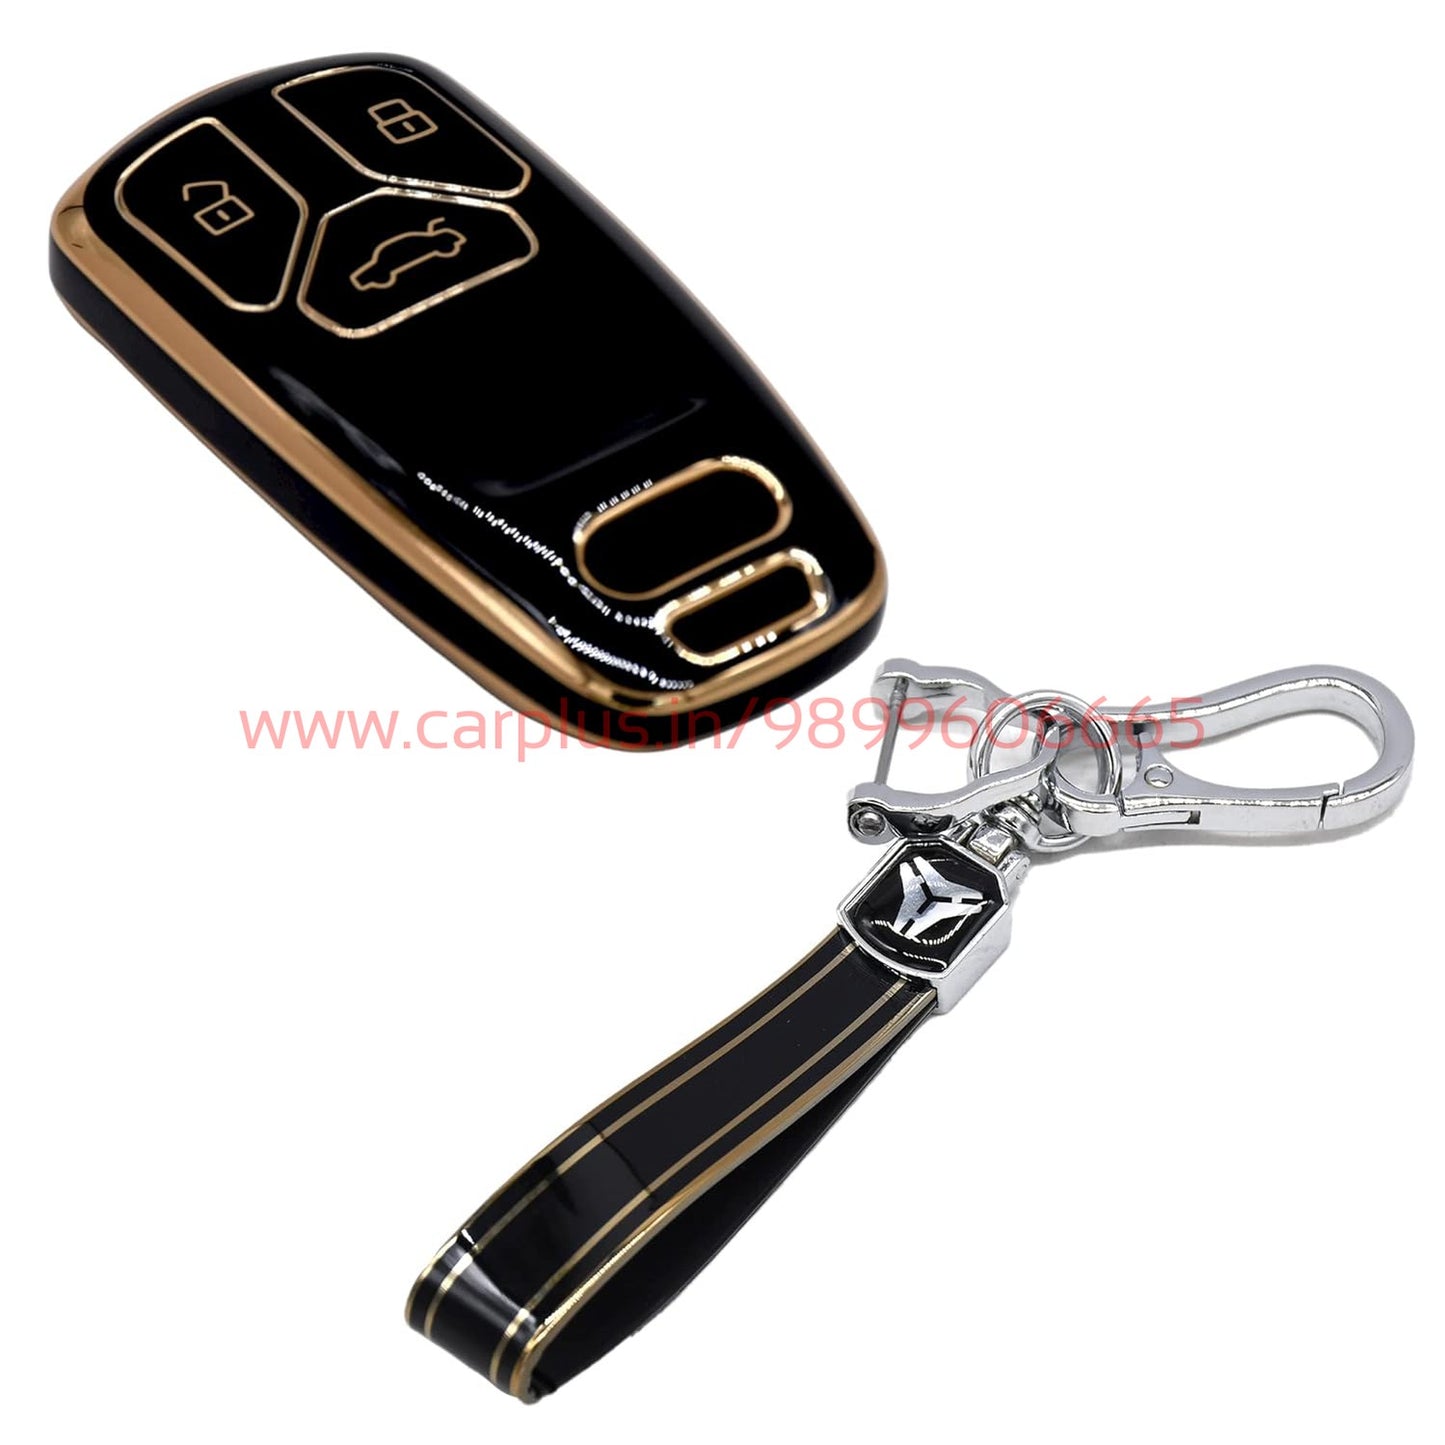 
                  
                    KMH TPU Gold Car Key Cover Compatible with Audi A4 TT TTS Q7 2016 2017 Key cover-TPU GOLD KEY COVER-KMH-KEY COVER-Black with Keychain-CARPLUS
                  
                